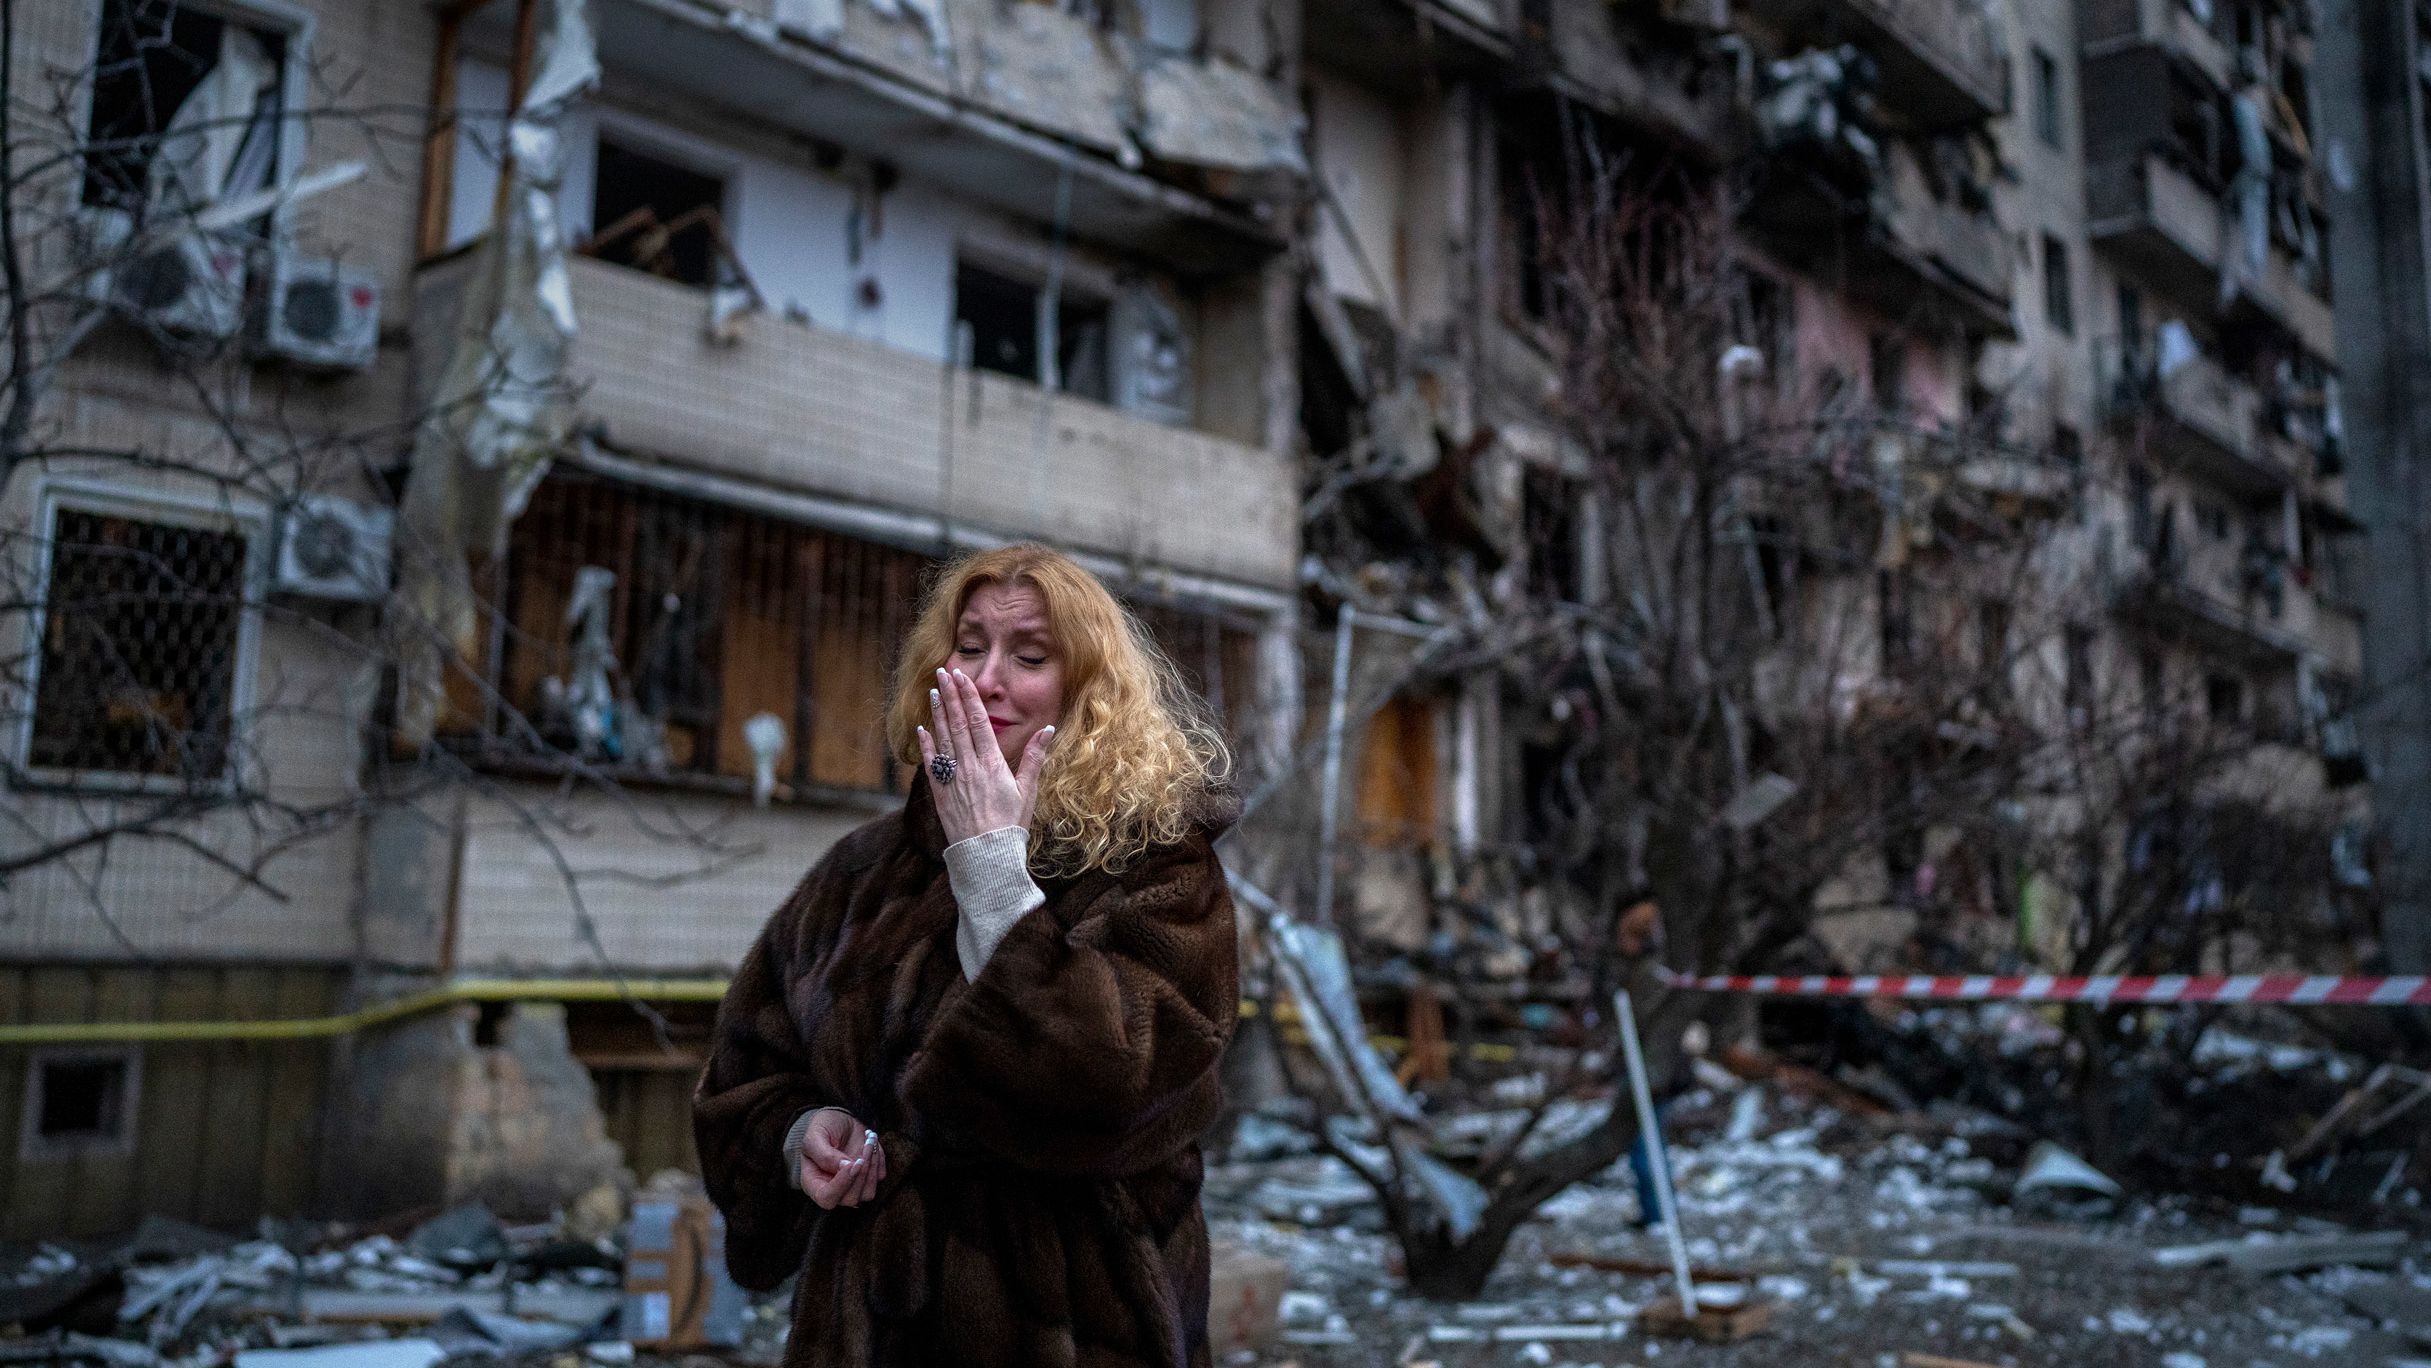 Natali Sevriukova reacts next to her house following a rocket attack on Kyiv on Friday, February 25, 2022.